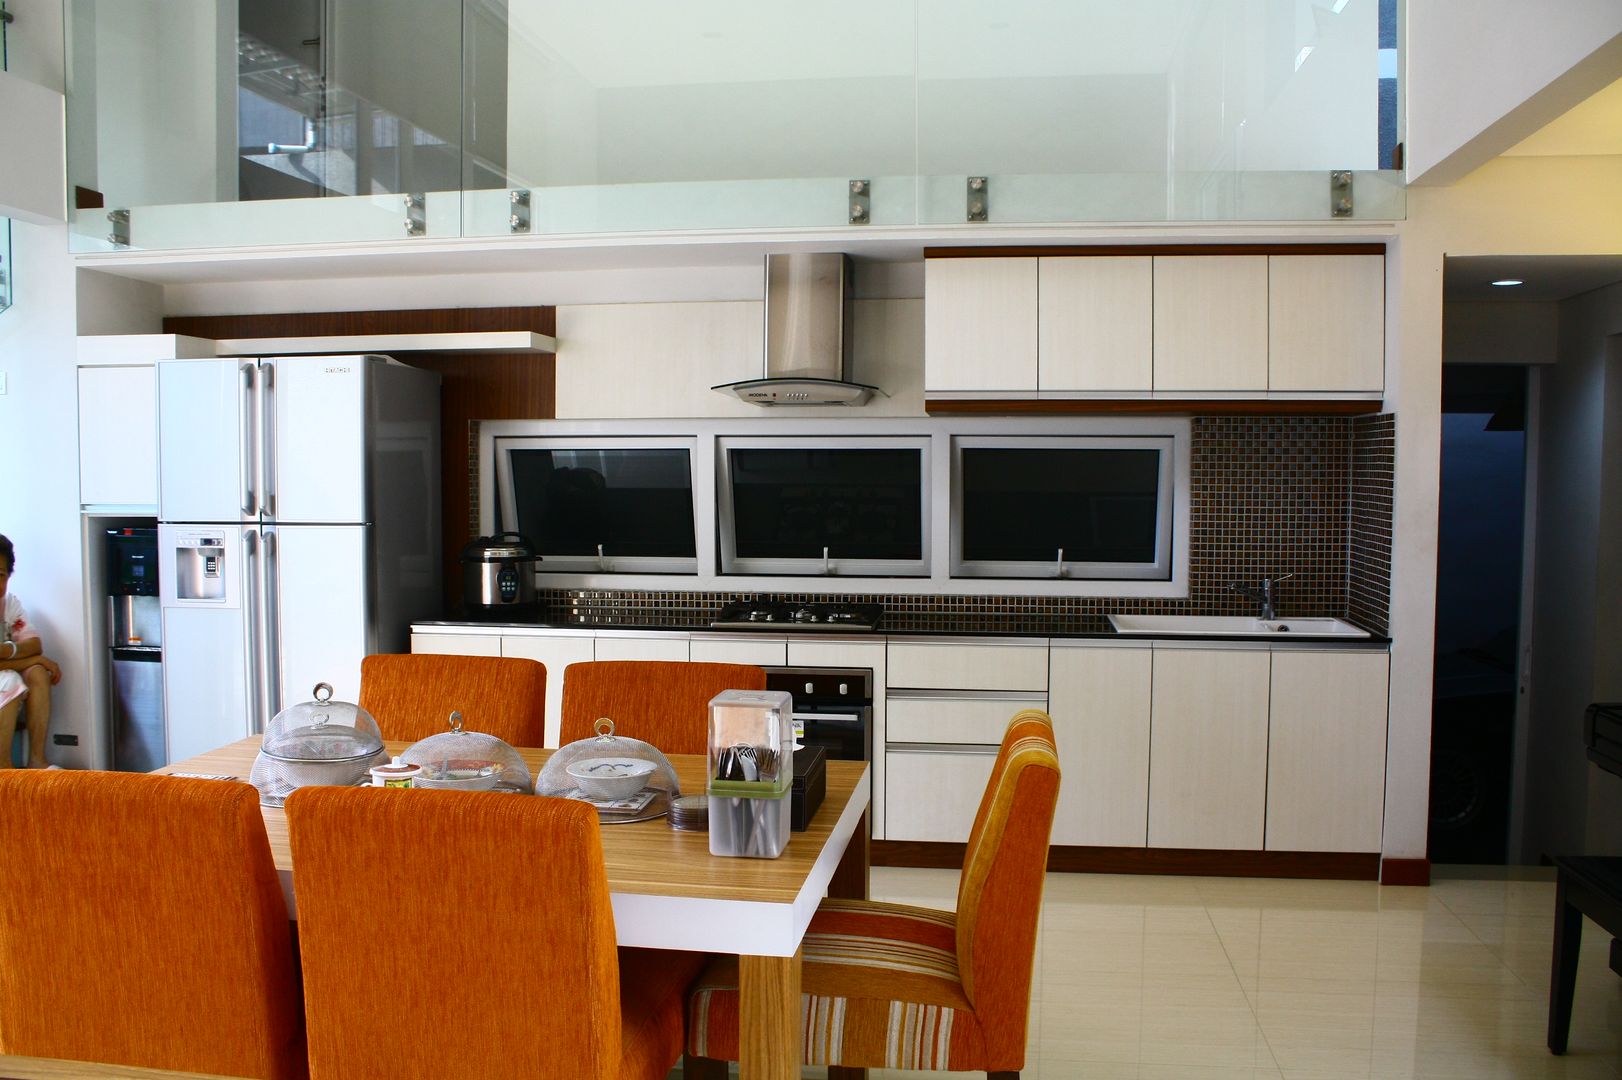 Living - Dining and Pantry - Cipete, Exxo interior Exxo interior Built-in kitchens